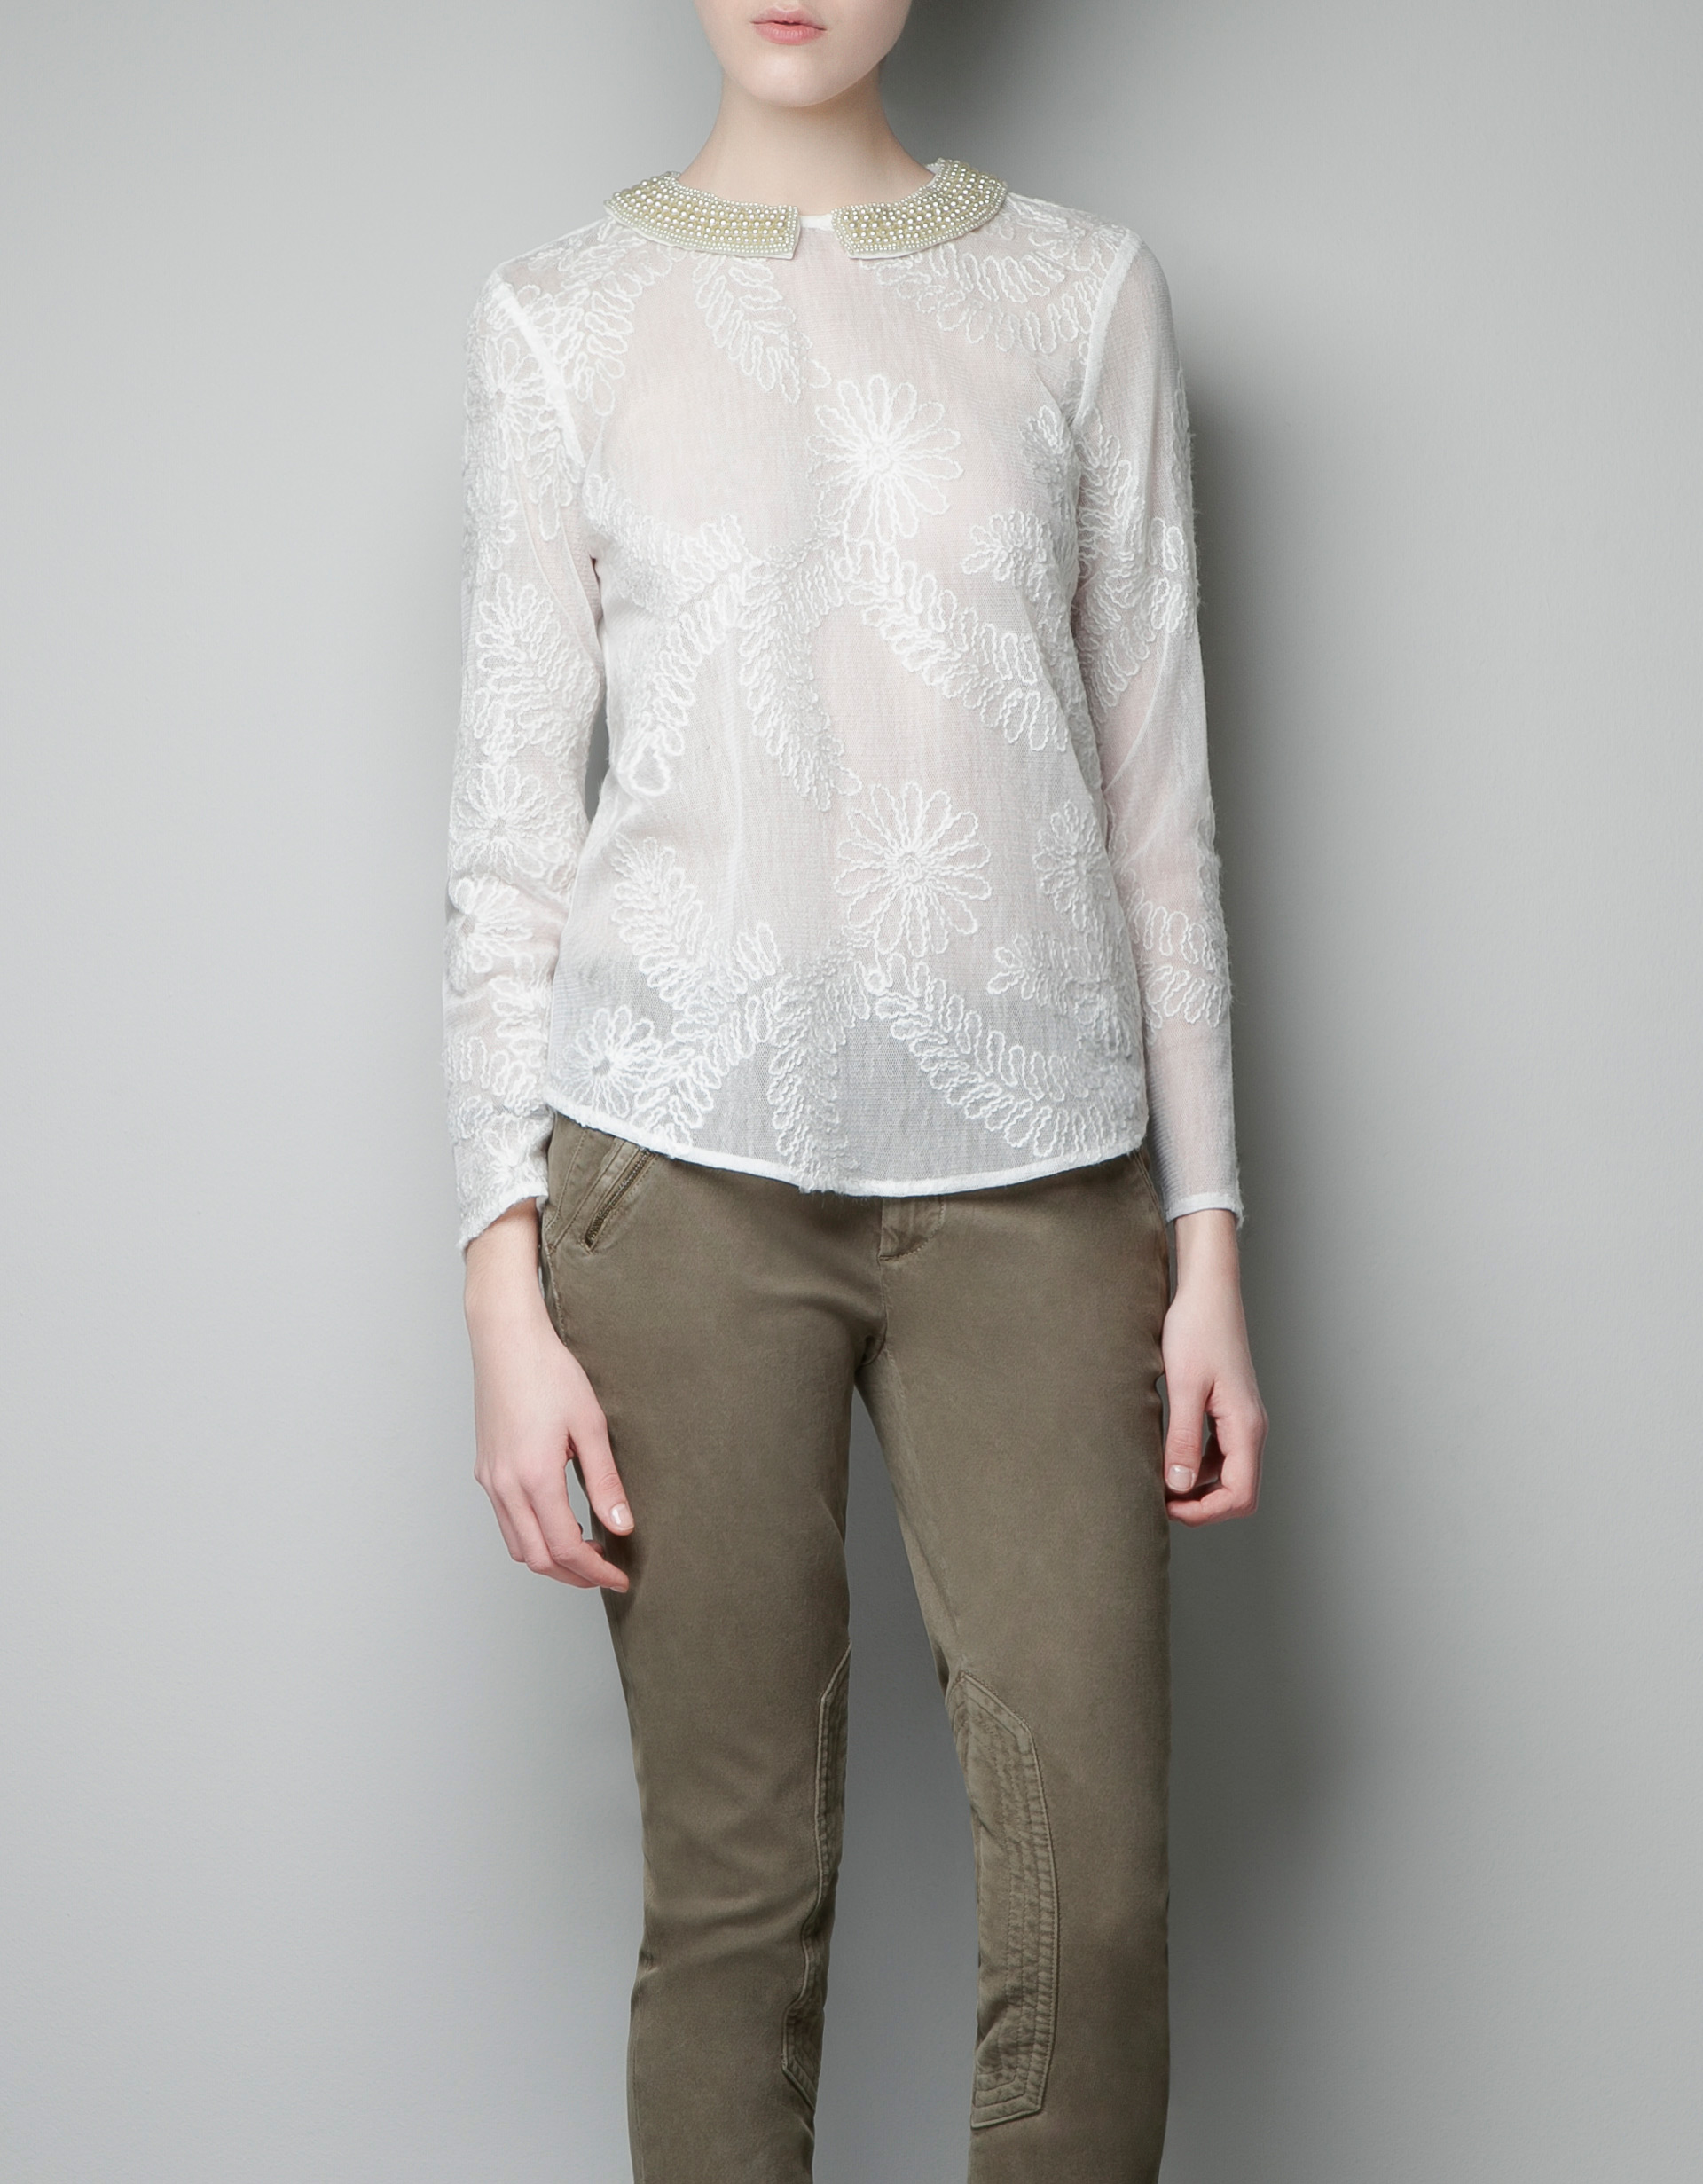 Zara Embroidered Blouse with Embellished Collar in White (off white) | Lyst